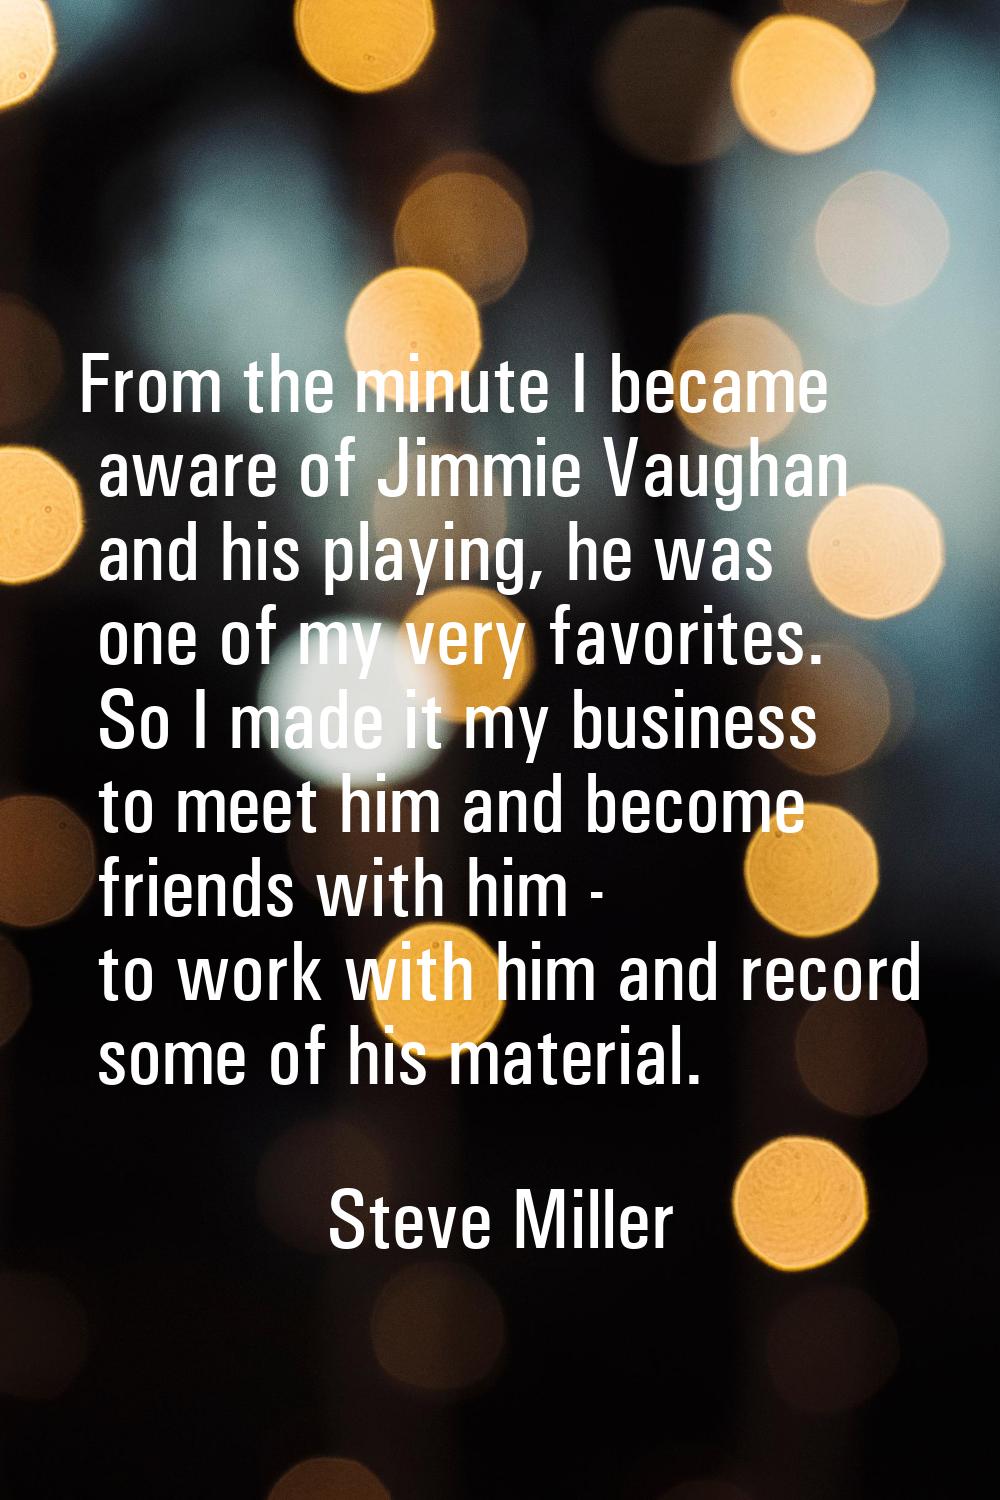 From the minute I became aware of Jimmie Vaughan and his playing, he was one of my very favorites. 